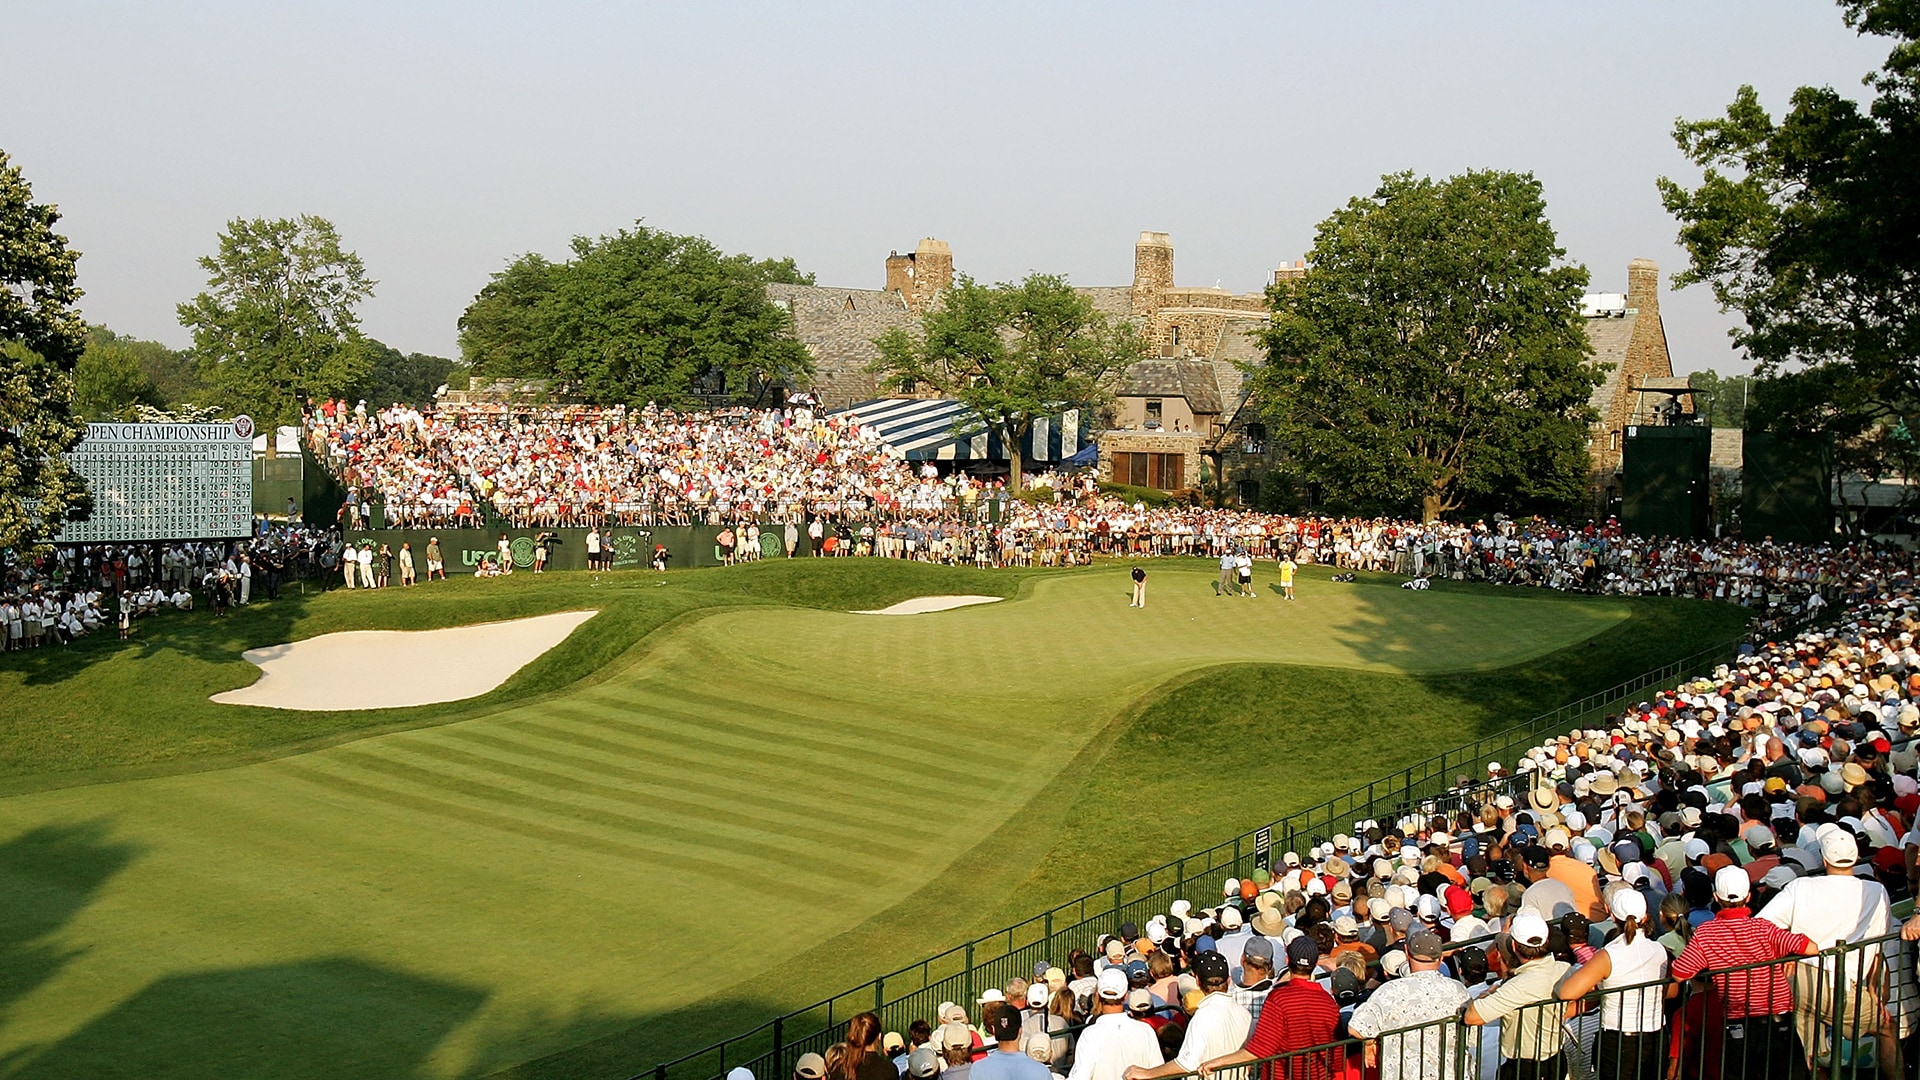 USGA remains ‘cautiously optimistic’ about U.S. Open at Winged Foot